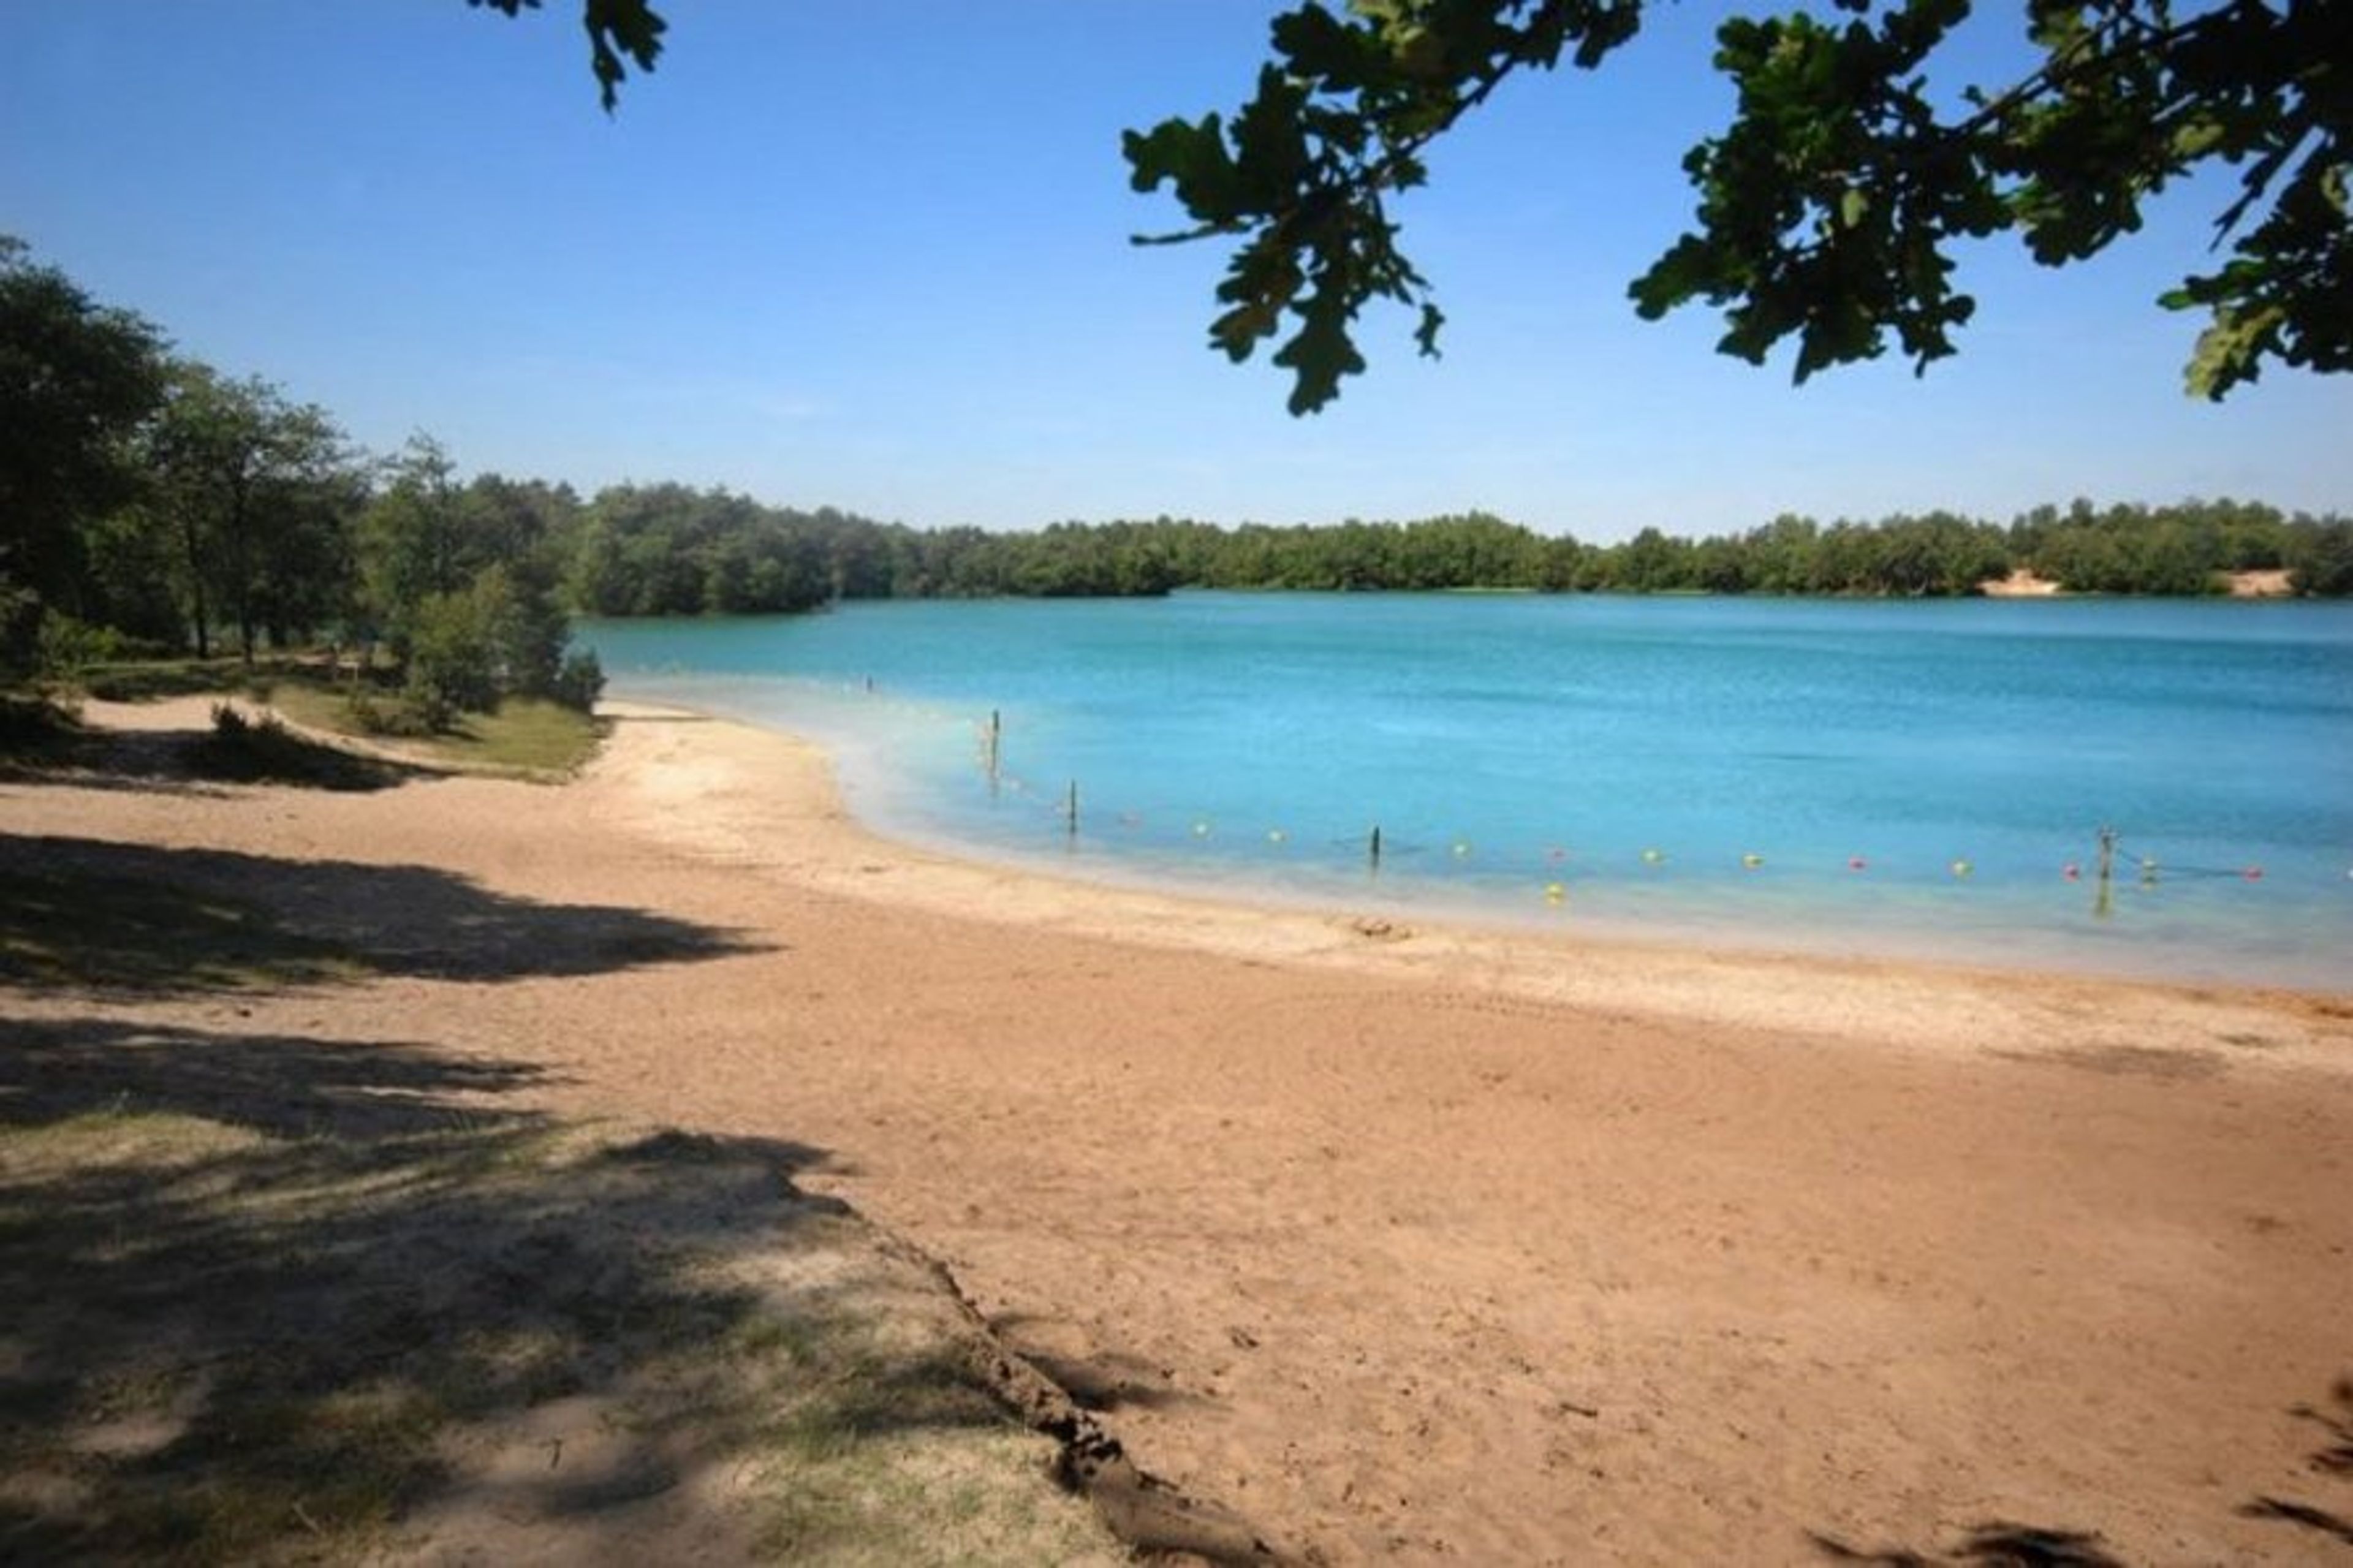 The beach of the 'Blue Lake' is less than 15 minutes away